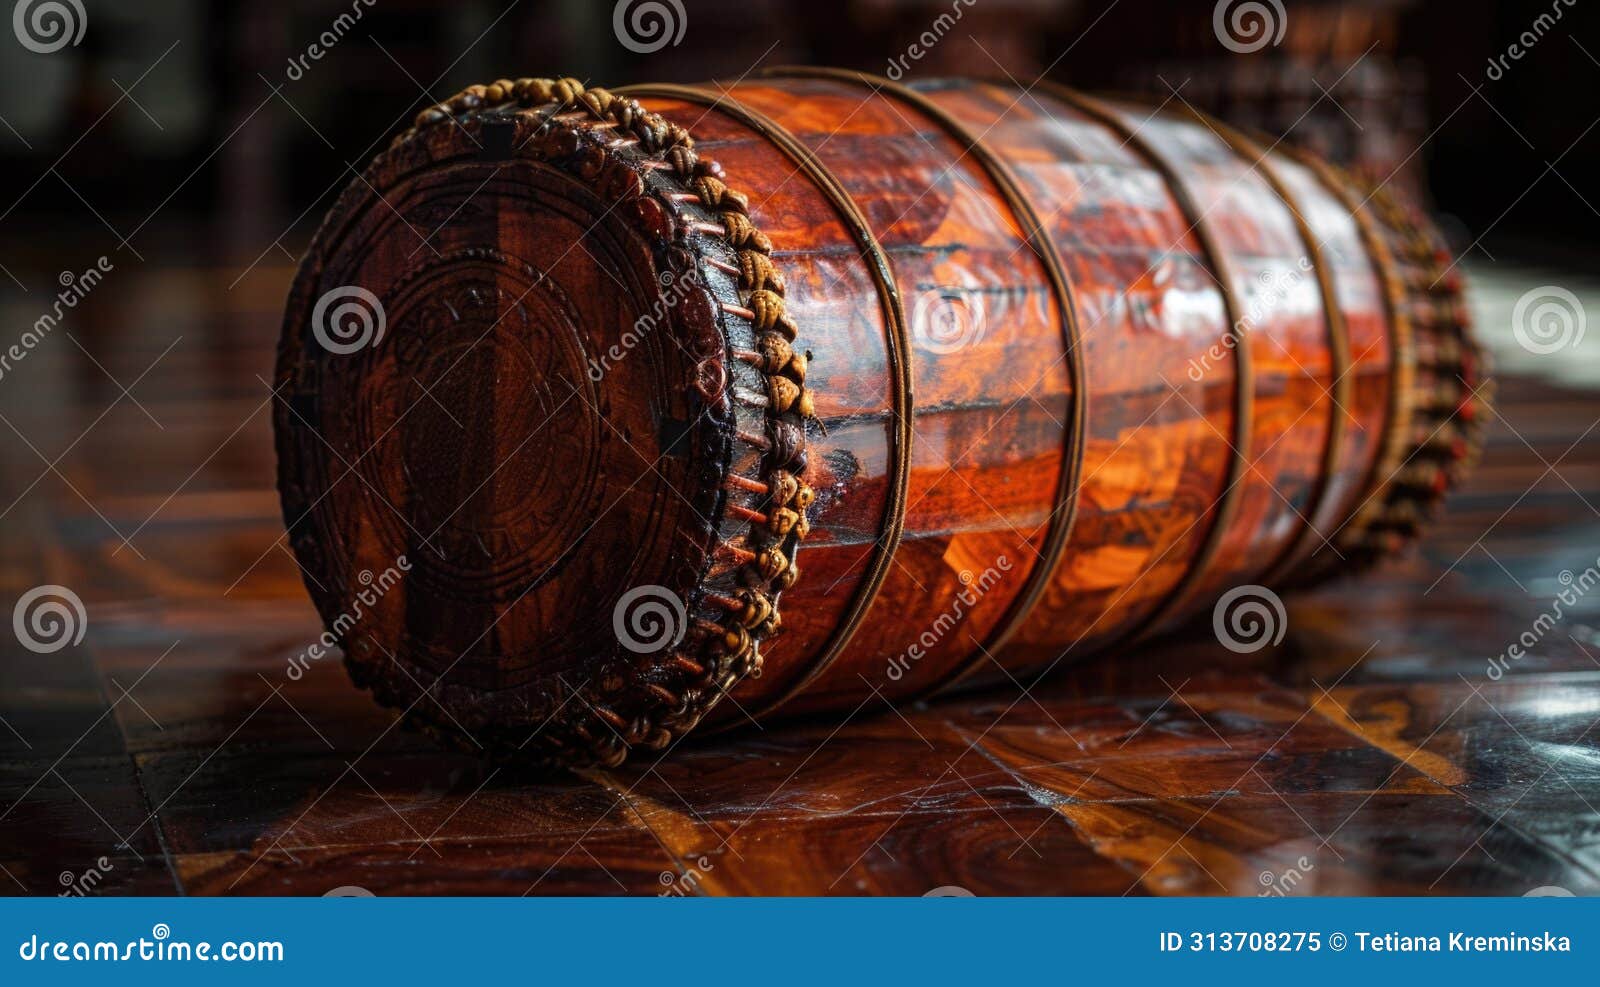 a crafted wooden "raban" drum, a traditional instrument used during sinhalese new year celebrations. the drum is